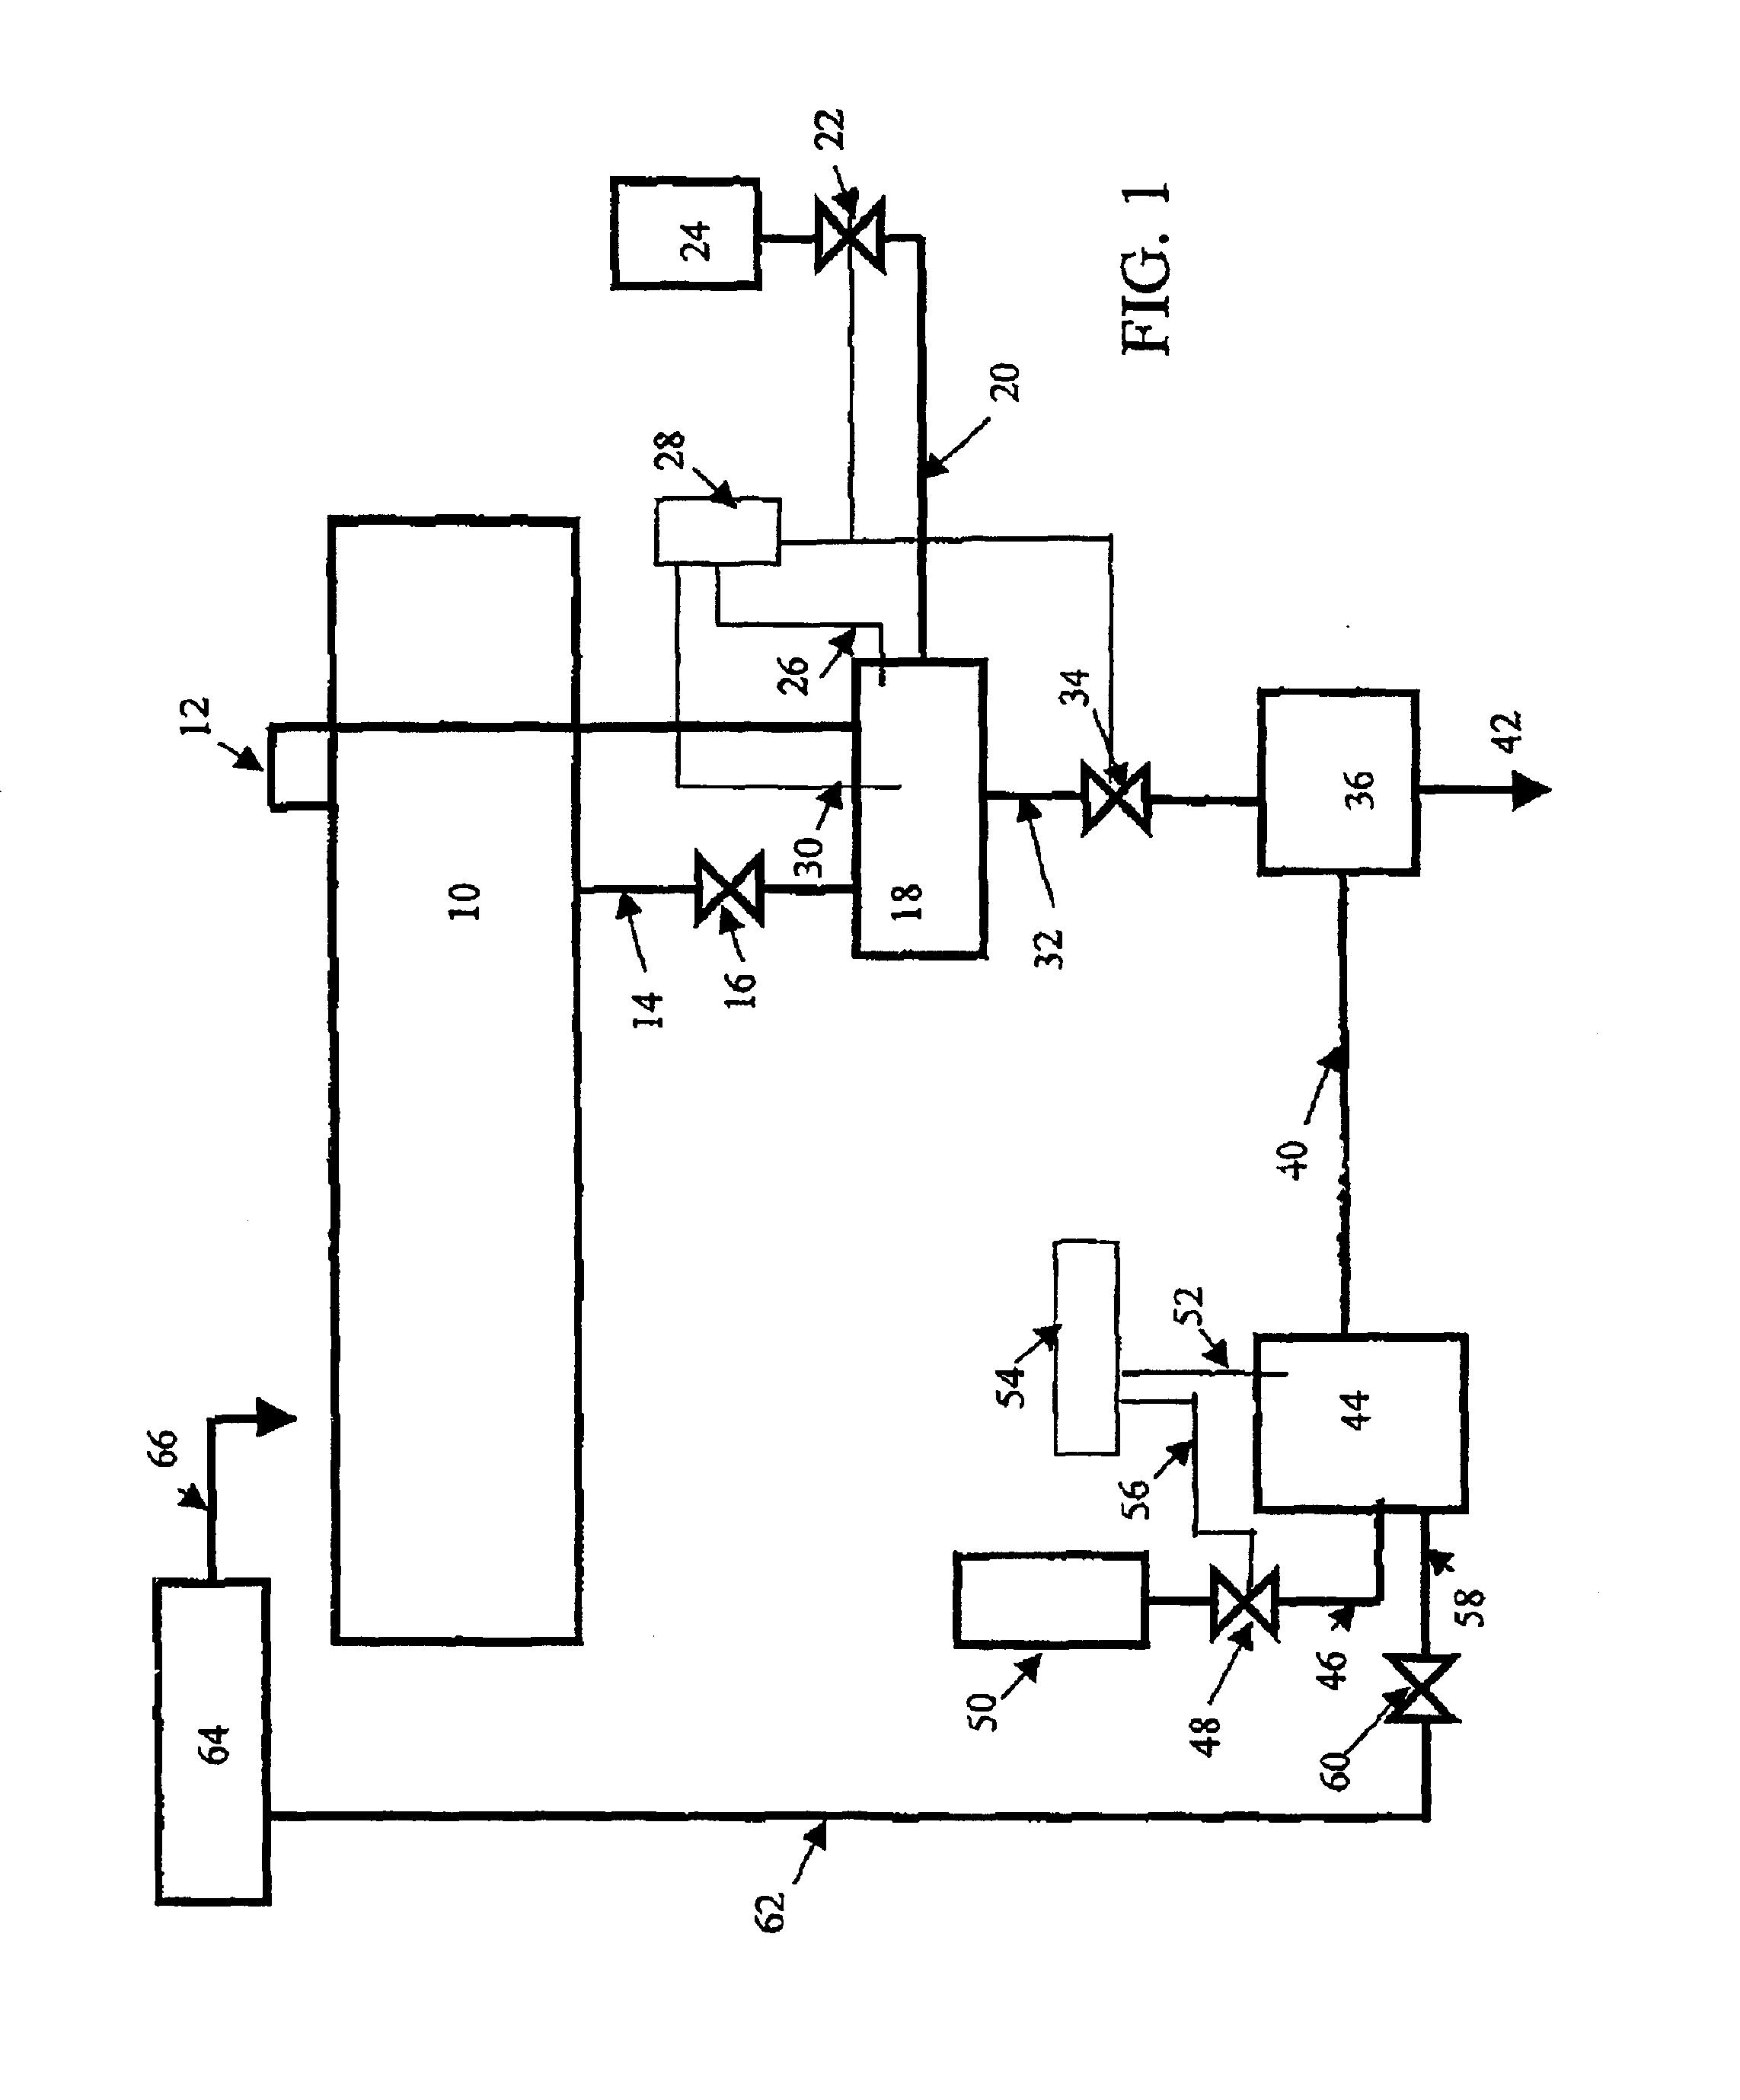 Method and apparatus for refreshment and reuse of loaded developer